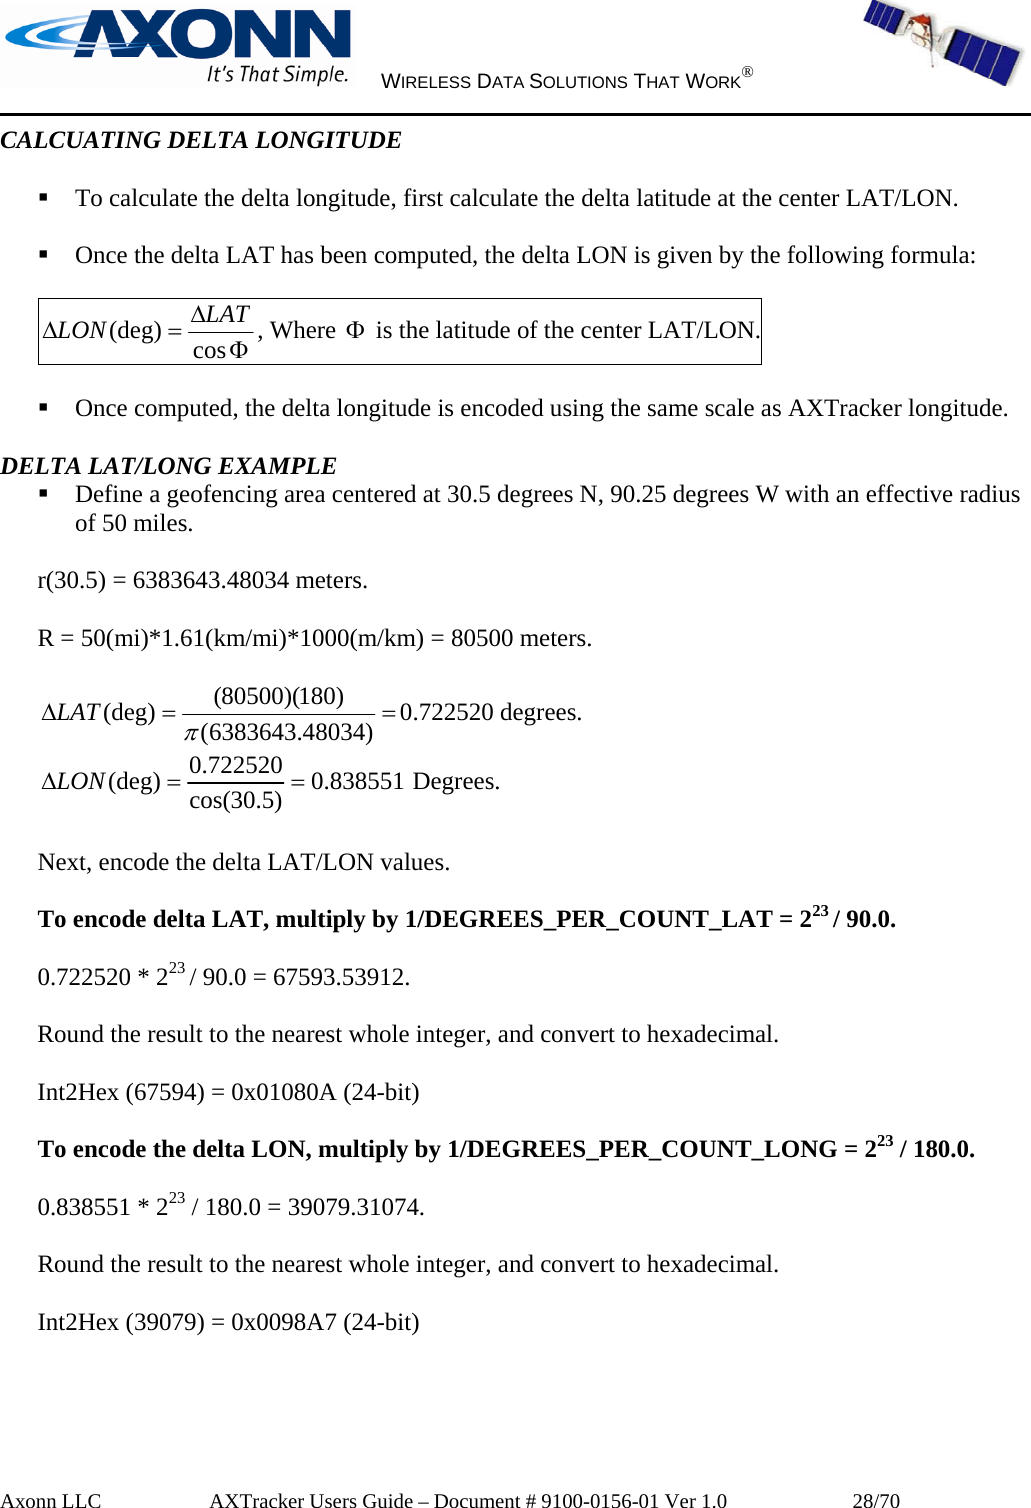     WIRELESS DATA SOLUTIONS THAT WORK®   Axonn LLC         AXTracker Users Guide – Document # 9100-0156-01 Ver 1.0                  28/70 CALCUATING DELTA LONGITUDE   To calculate the delta longitude, first calculate the delta latitude at the center LAT/LON.   Once the delta LAT has been computed, the delta LON is given by the following formula:  ΦΔ=Δ cos(deg) LATLON , Where Φ is the latitude of the center LAT/LON.   Once computed, the delta longitude is encoded using the same scale as AXTracker longitude.  DELTA LAT/LONG EXAMPLE  Define a geofencing area centered at 30.5 degrees N, 90.25 degrees W with an effective radius of 50 miles.  r(30.5) = 6383643.48034 meters.  R = 50(mi)*1.61(km/mi)*1000(m/km) = 80500 meters.  ==Δ )48034.6383643()180)(80500((deg)πLAT 0.722520 degrees. 838551.0)5.30cos(722520.0(deg) ==ΔLON  Degrees.  Next, encode the delta LAT/LON values.  To encode delta LAT, multiply by 1/DEGREES_PER_COUNT_LAT = 223 / 90.0.  0.722520 * 223 / 90.0 = 67593.53912.  Round the result to the nearest whole integer, and convert to hexadecimal.  Int2Hex (67594) = 0x01080A (24-bit)  To encode the delta LON, multiply by 1/DEGREES_PER_COUNT_LONG = 223 / 180.0.  0.838551 * 223 / 180.0 = 39079.31074.  Round the result to the nearest whole integer, and convert to hexadecimal.  Int2Hex (39079) = 0x0098A7 (24-bit)  